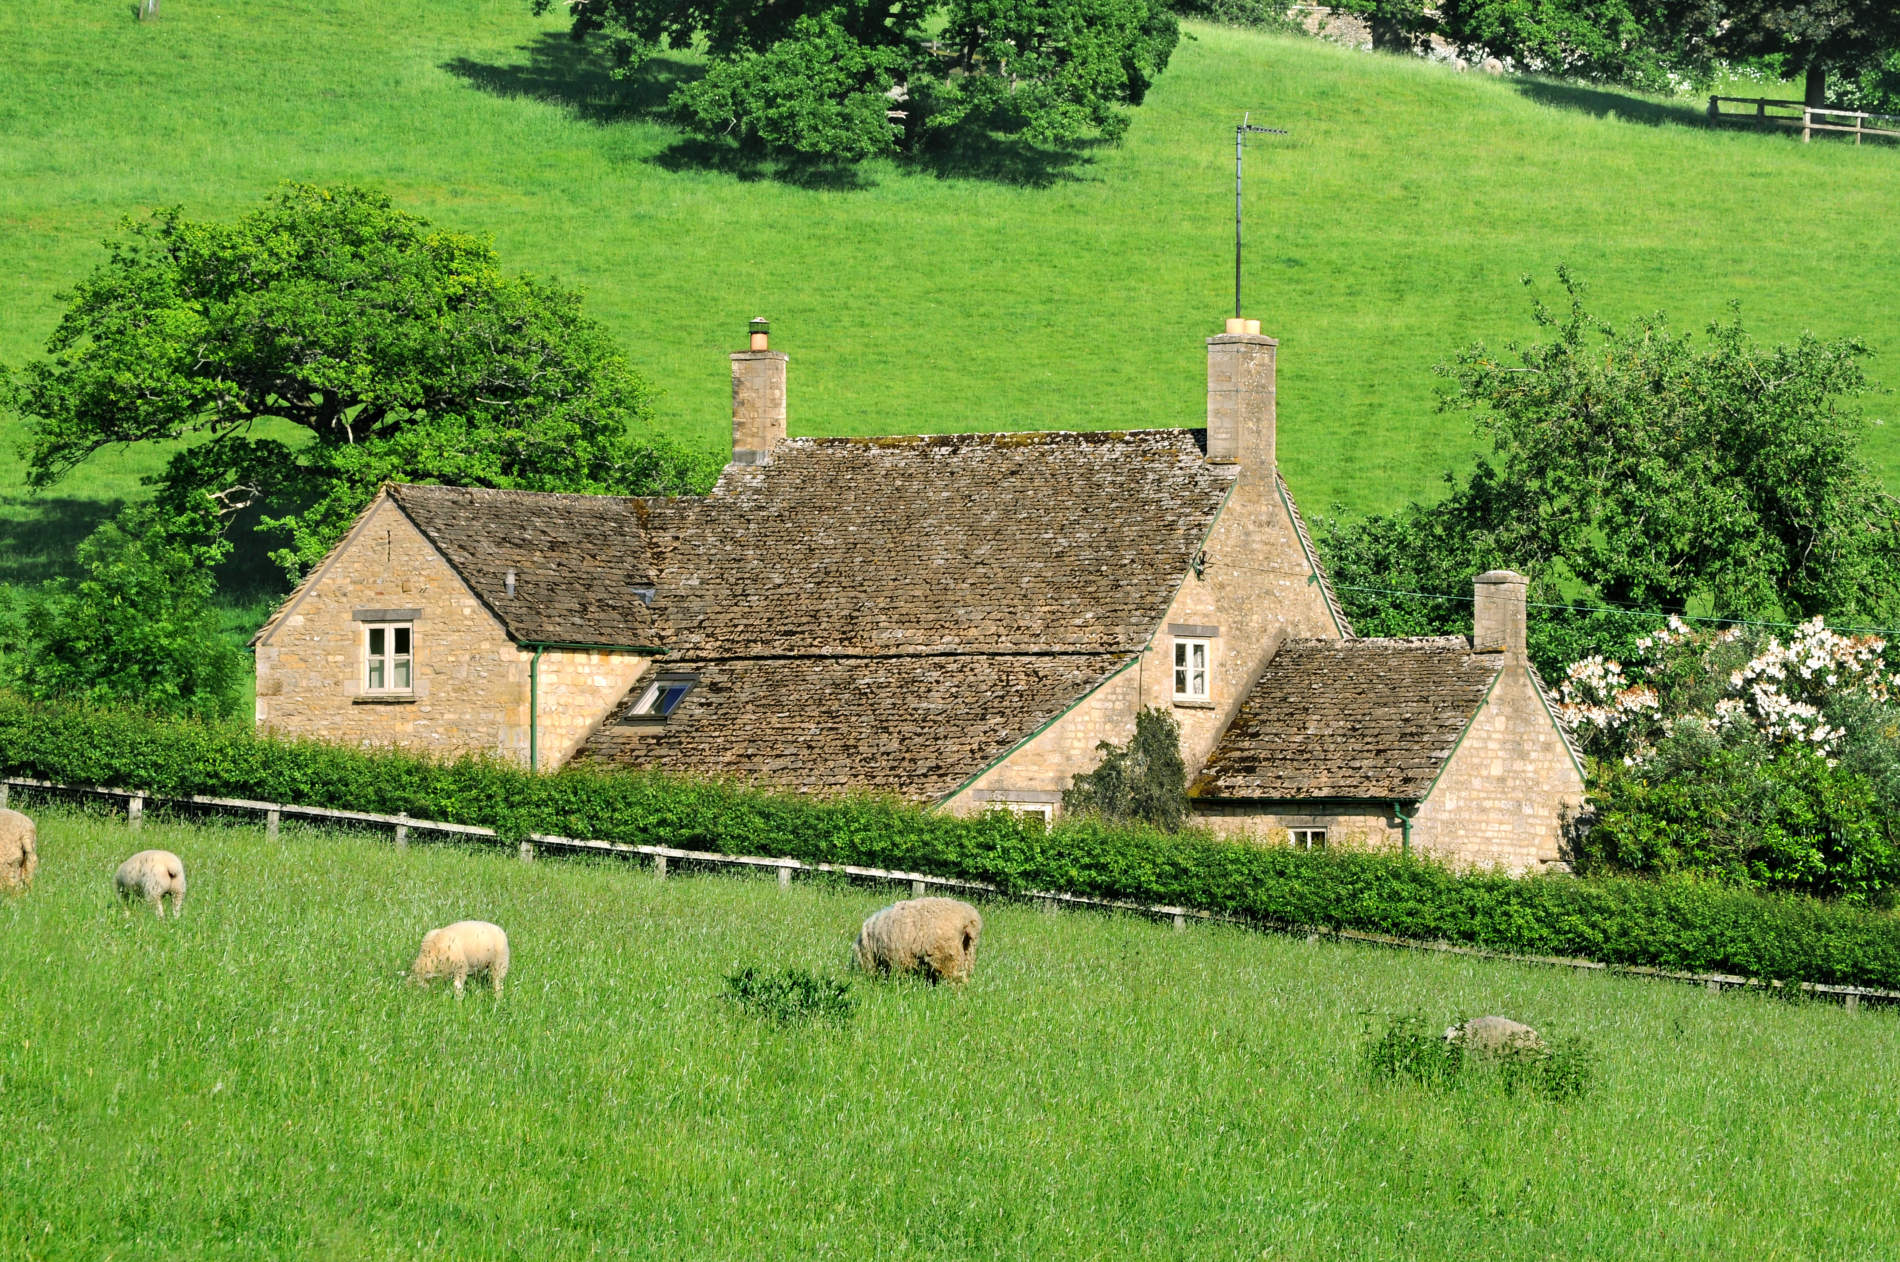 Farmhouse in English countryside of Cotswolds